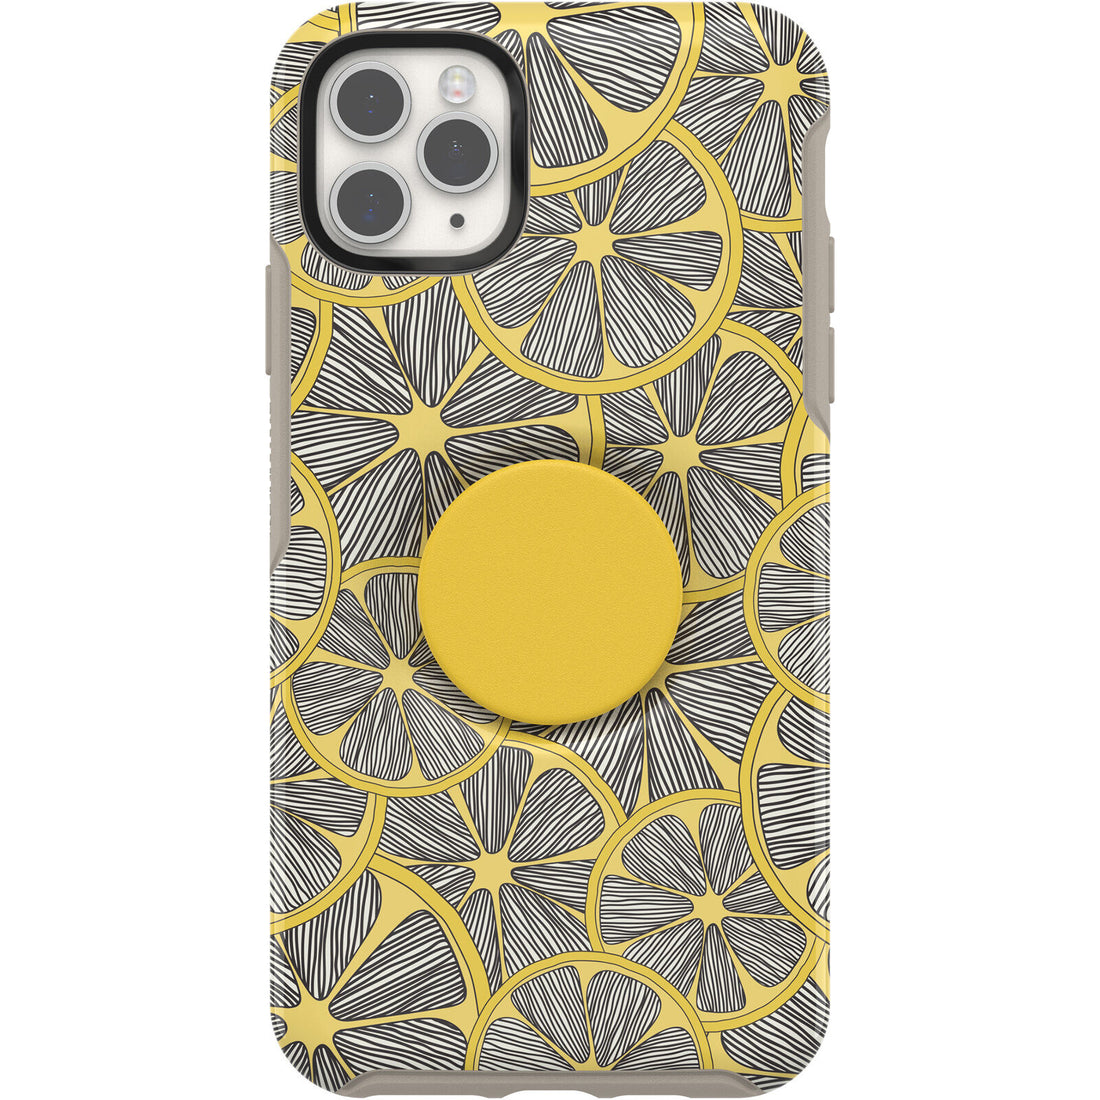 OtterBox + POP Case for Apple iPhone 11 Pro Max - Always Tarty (New)